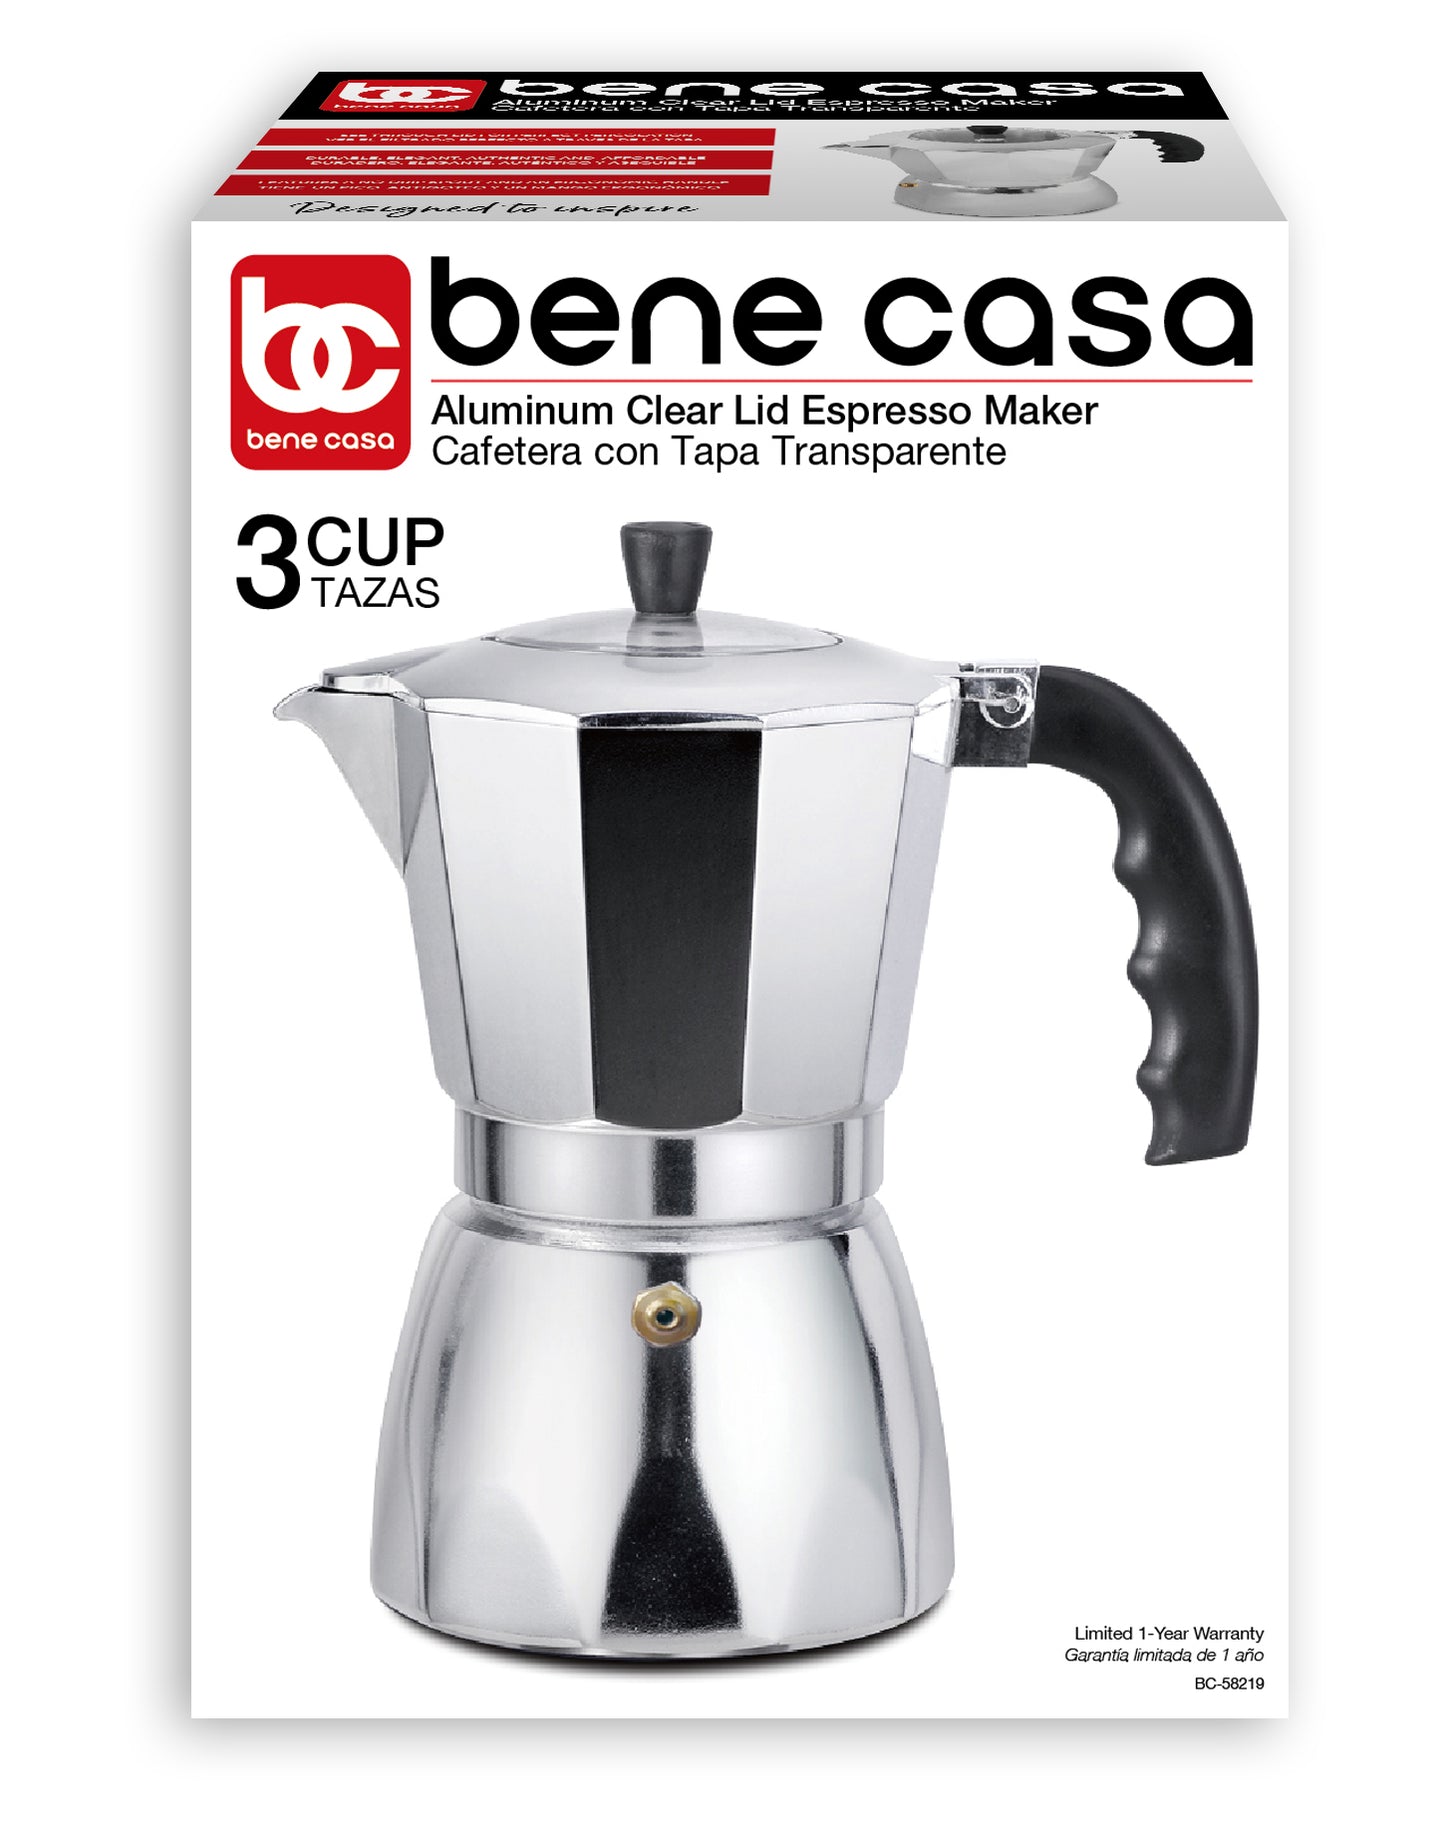  Bene Casa 3.5 Bar Espresso Cappuccino Latte Machine Maker with  Frother, Red: Home & Kitchen